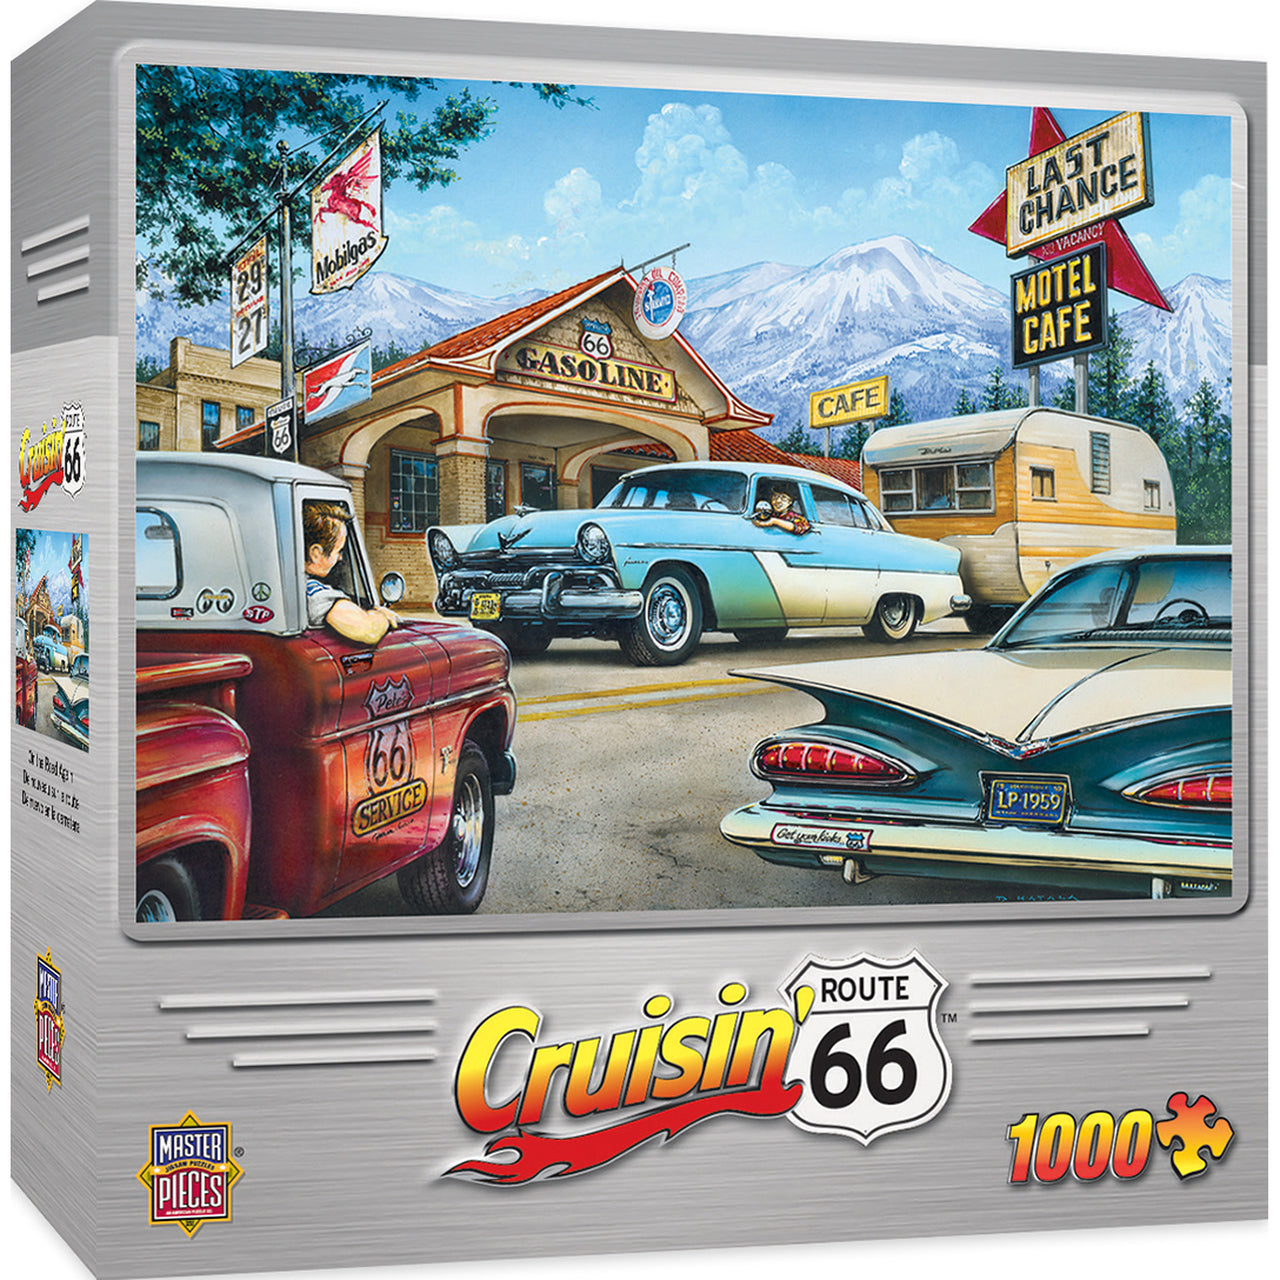 Cruisin' Route 66 - On the Road Again - 1000 Piece Jigsaw Puzzle by Masterpieces